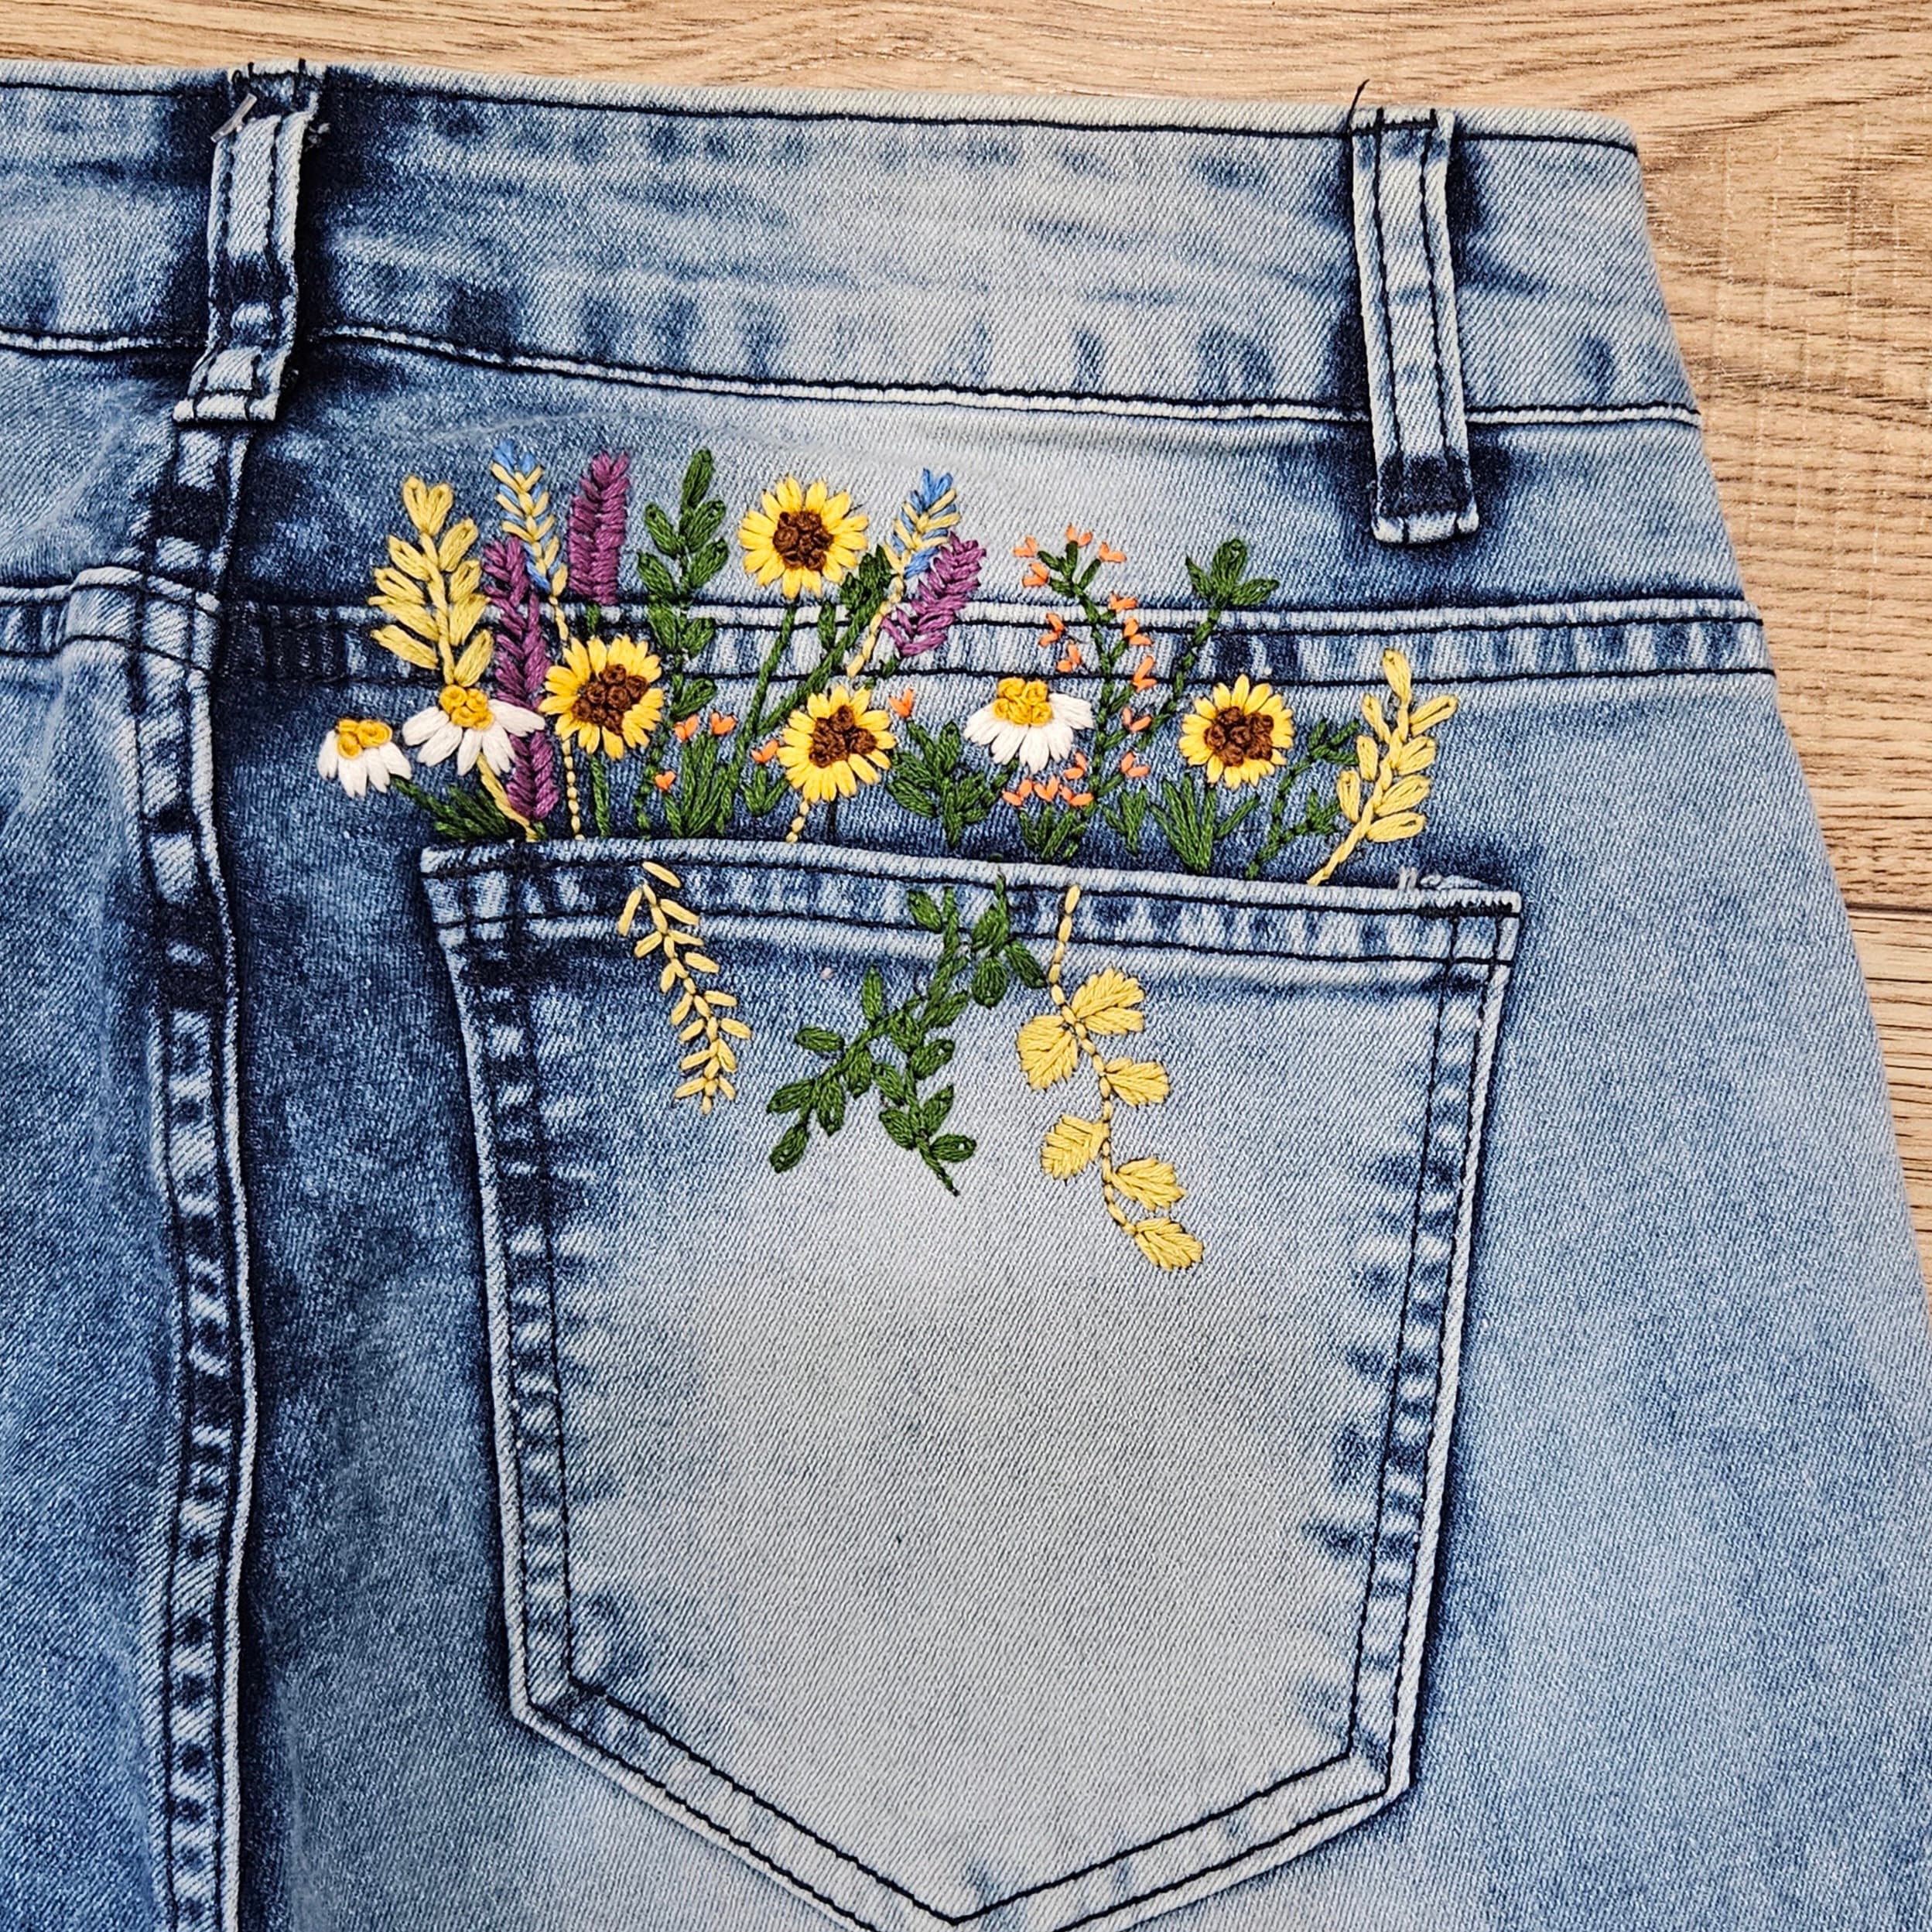 Vintage Embroidered Floral Jeans, Blue Embroidered Denim Pants, Handmade  Boho Jeans, Summer Cropped Pants, Soft Cotton Jeans, Gift for Her 